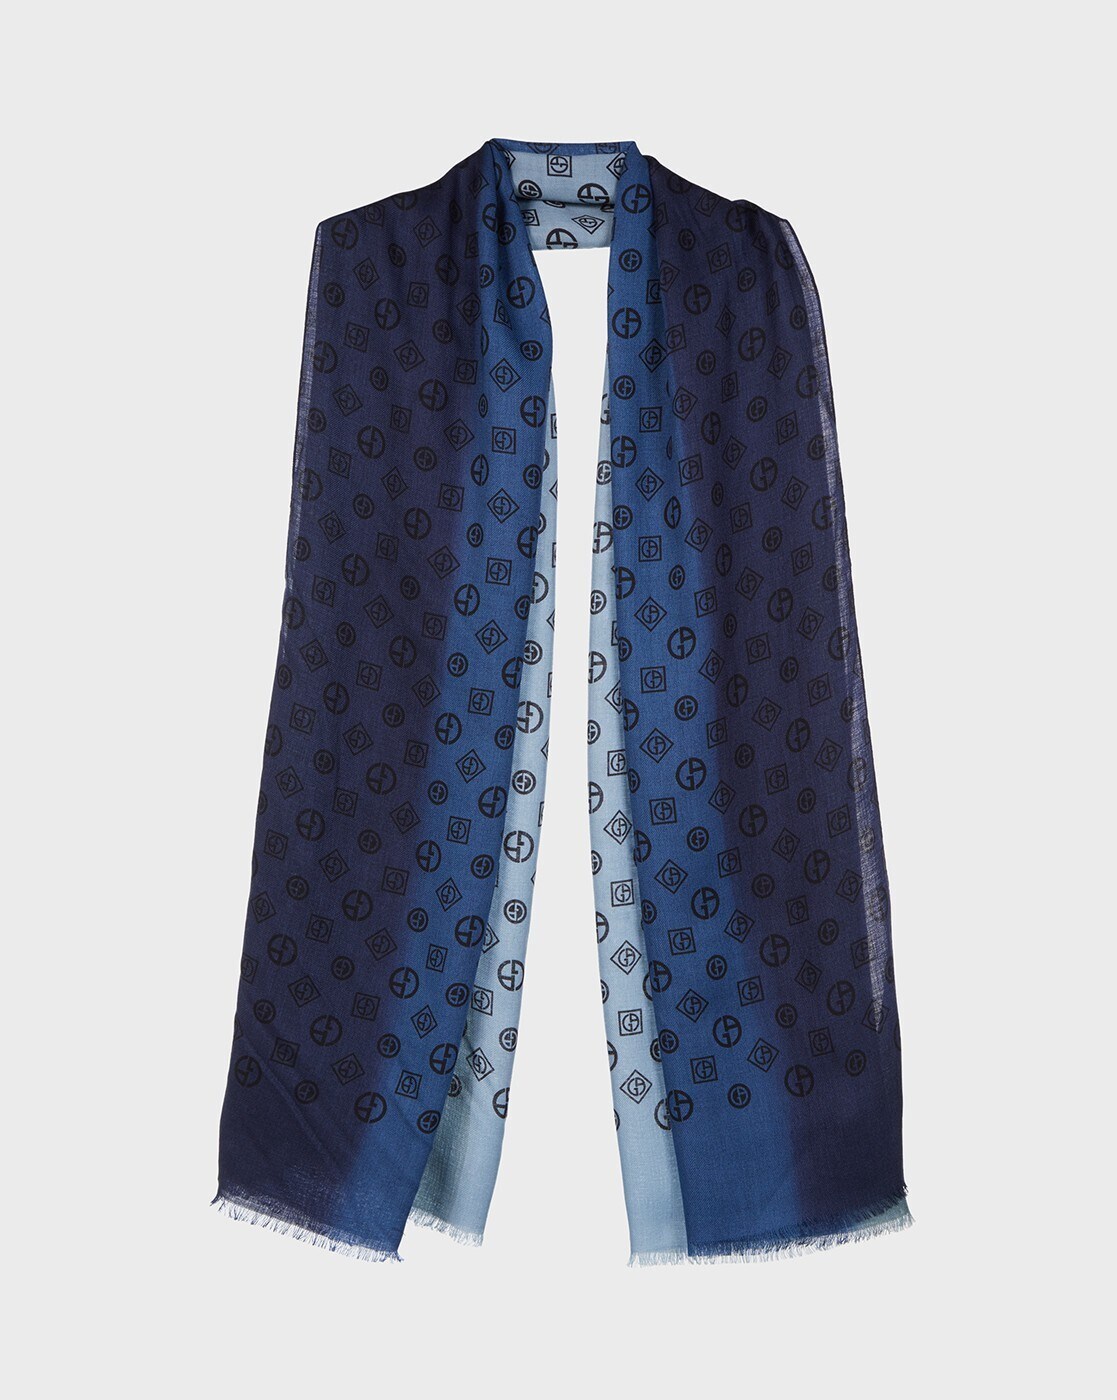 Buy GIORGIO ARMANI Mainline Woolen Scarf with All-Over Logo